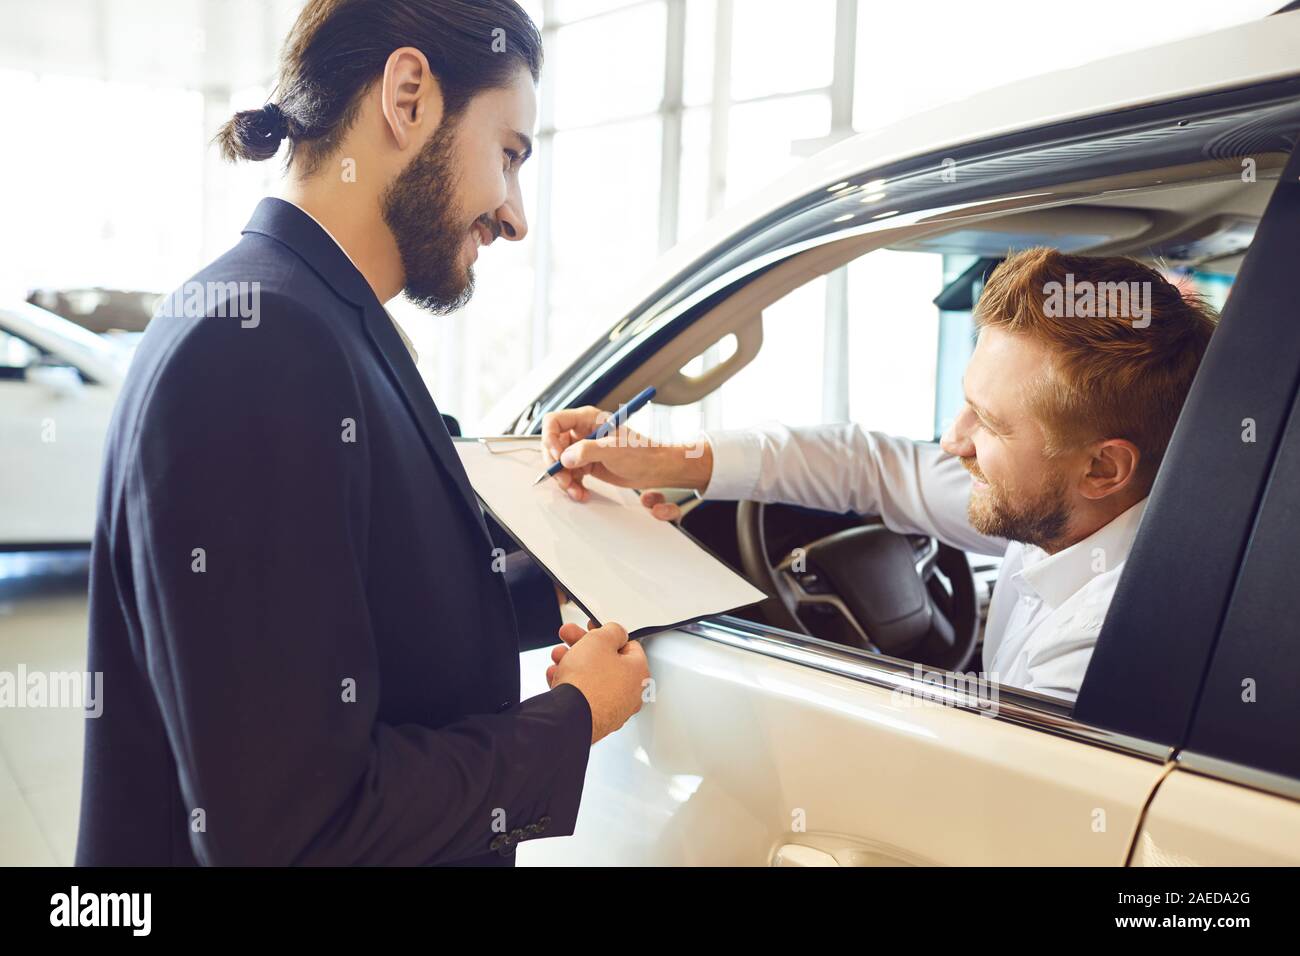 A young woman buys a car signs a contract in a car showroom. A man signs a car rental agreement. Stock Photo